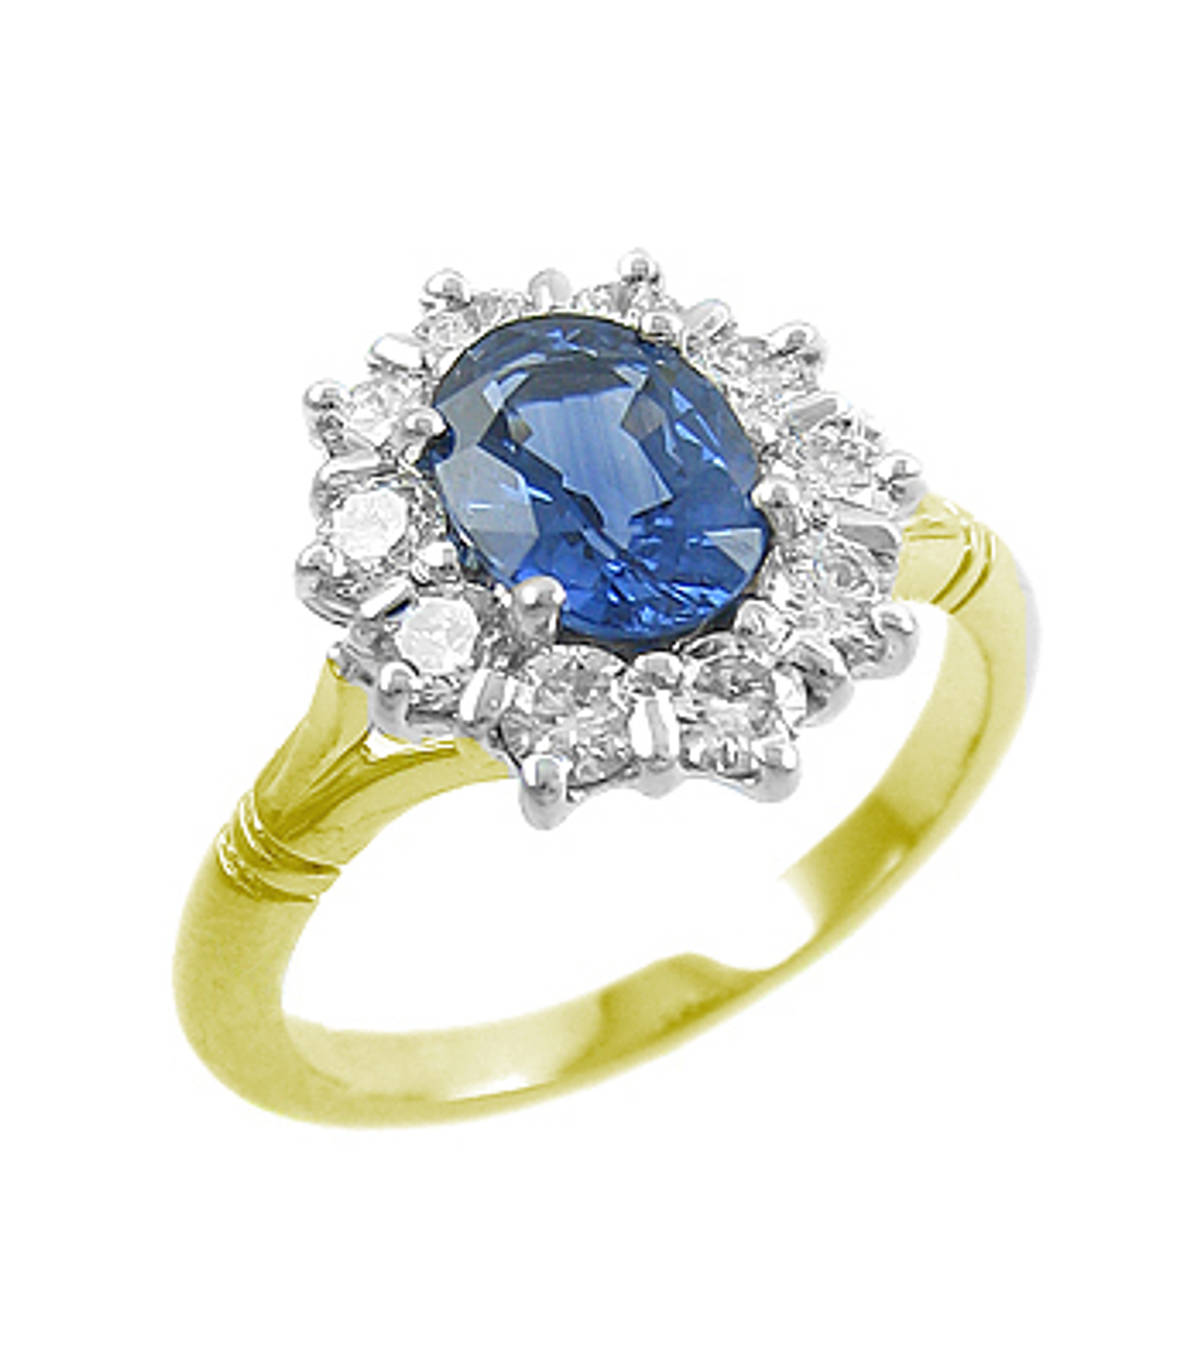 Sapphire and diamond cluster ringPictured item: sapphire 1.40ct/diamonds 0.83ct set in 18k yellow and white gold